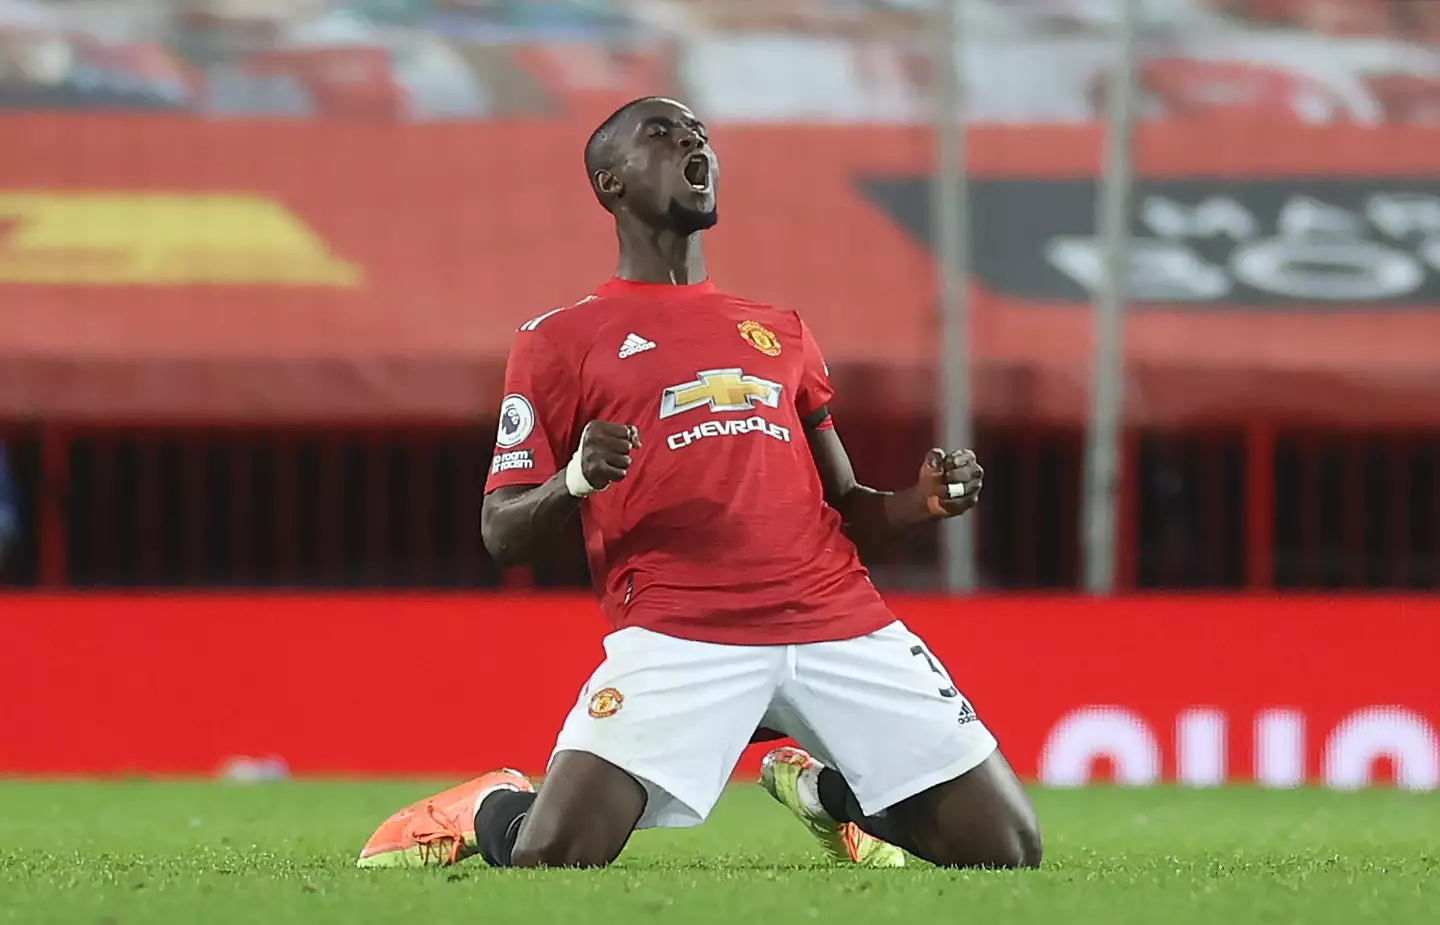 Bailly has had some good moments as a United player, and others not so good. Image: PA Images